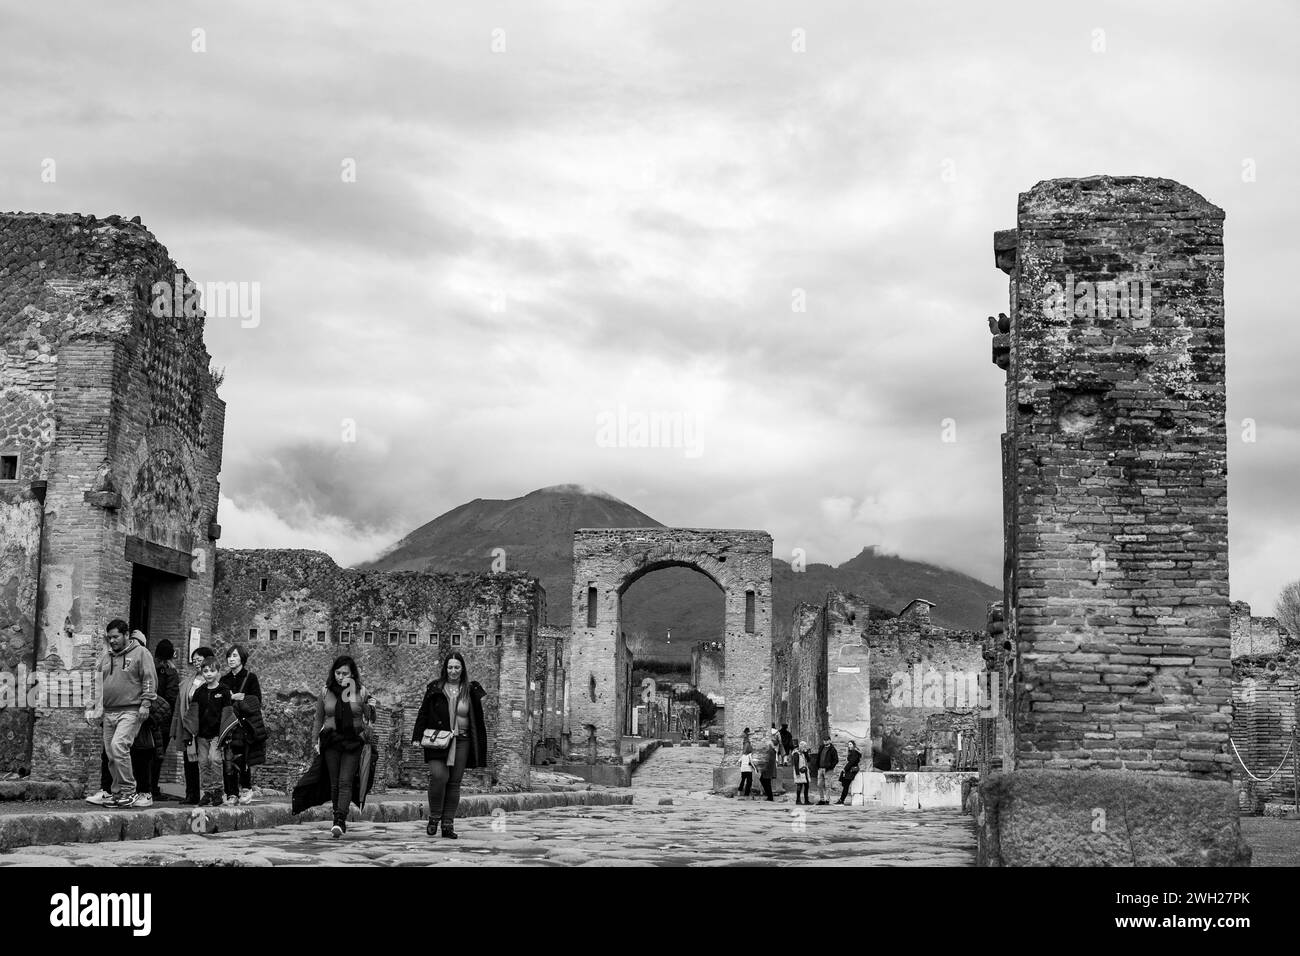 Visiting the city of Pompeii that was covered with volcanic ashes after the eruption of Mount Vesuvius, touristic places in Italy. Stock Photo